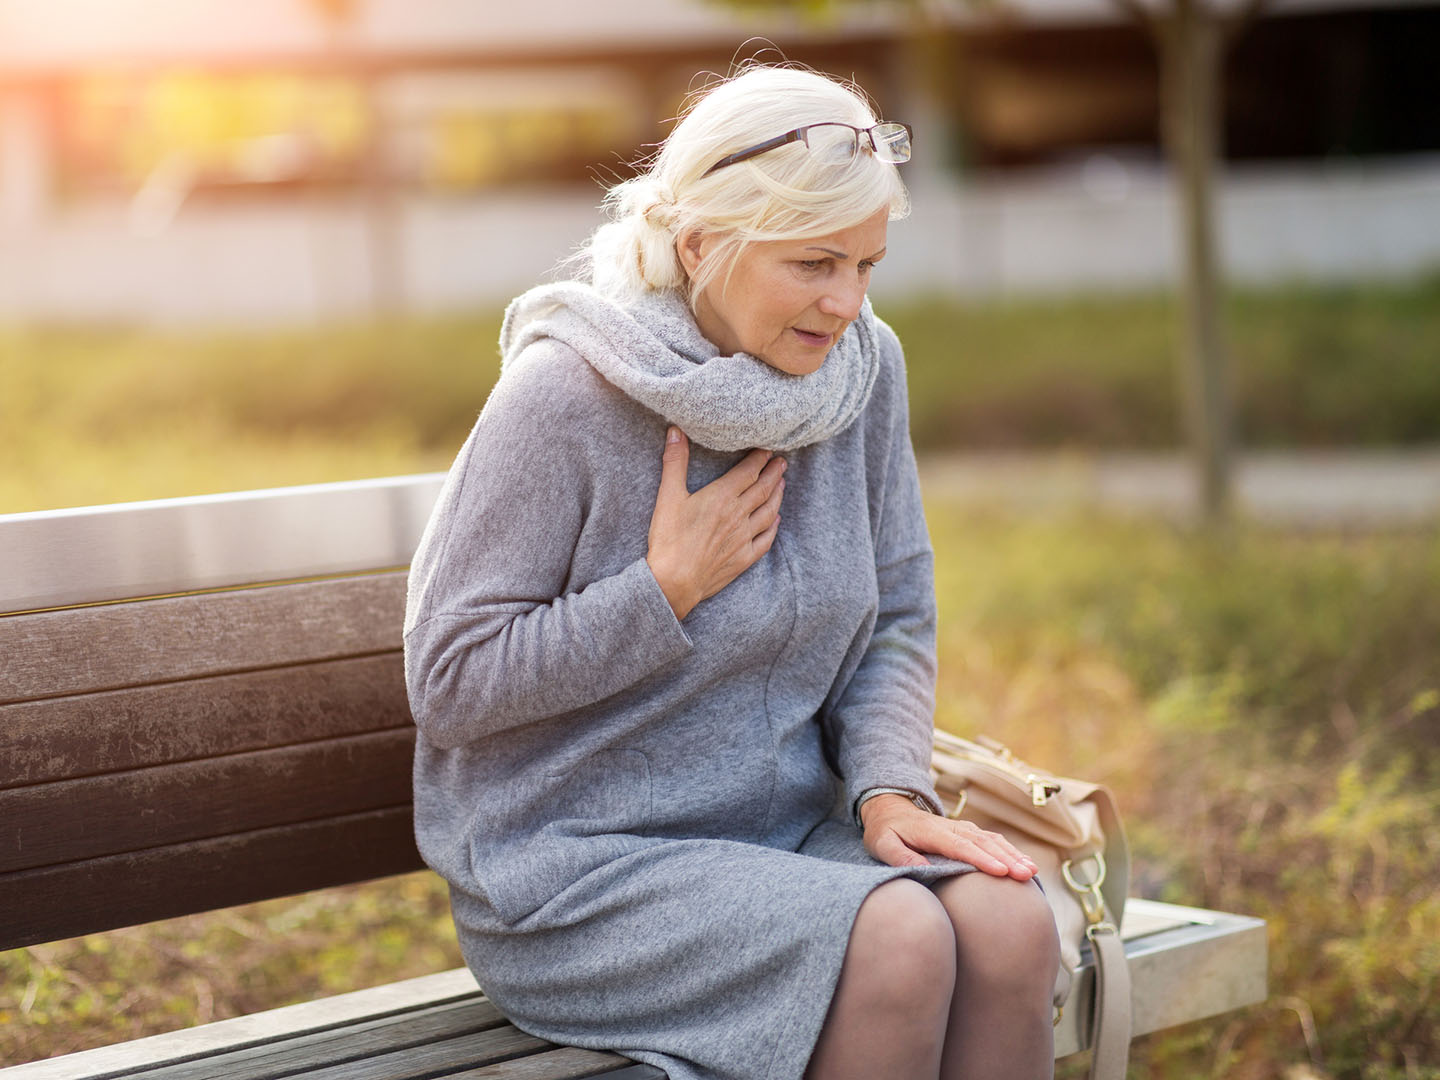 Women’s Chest Pain | Weekly Bulletins | Andrew Weil, M.D.